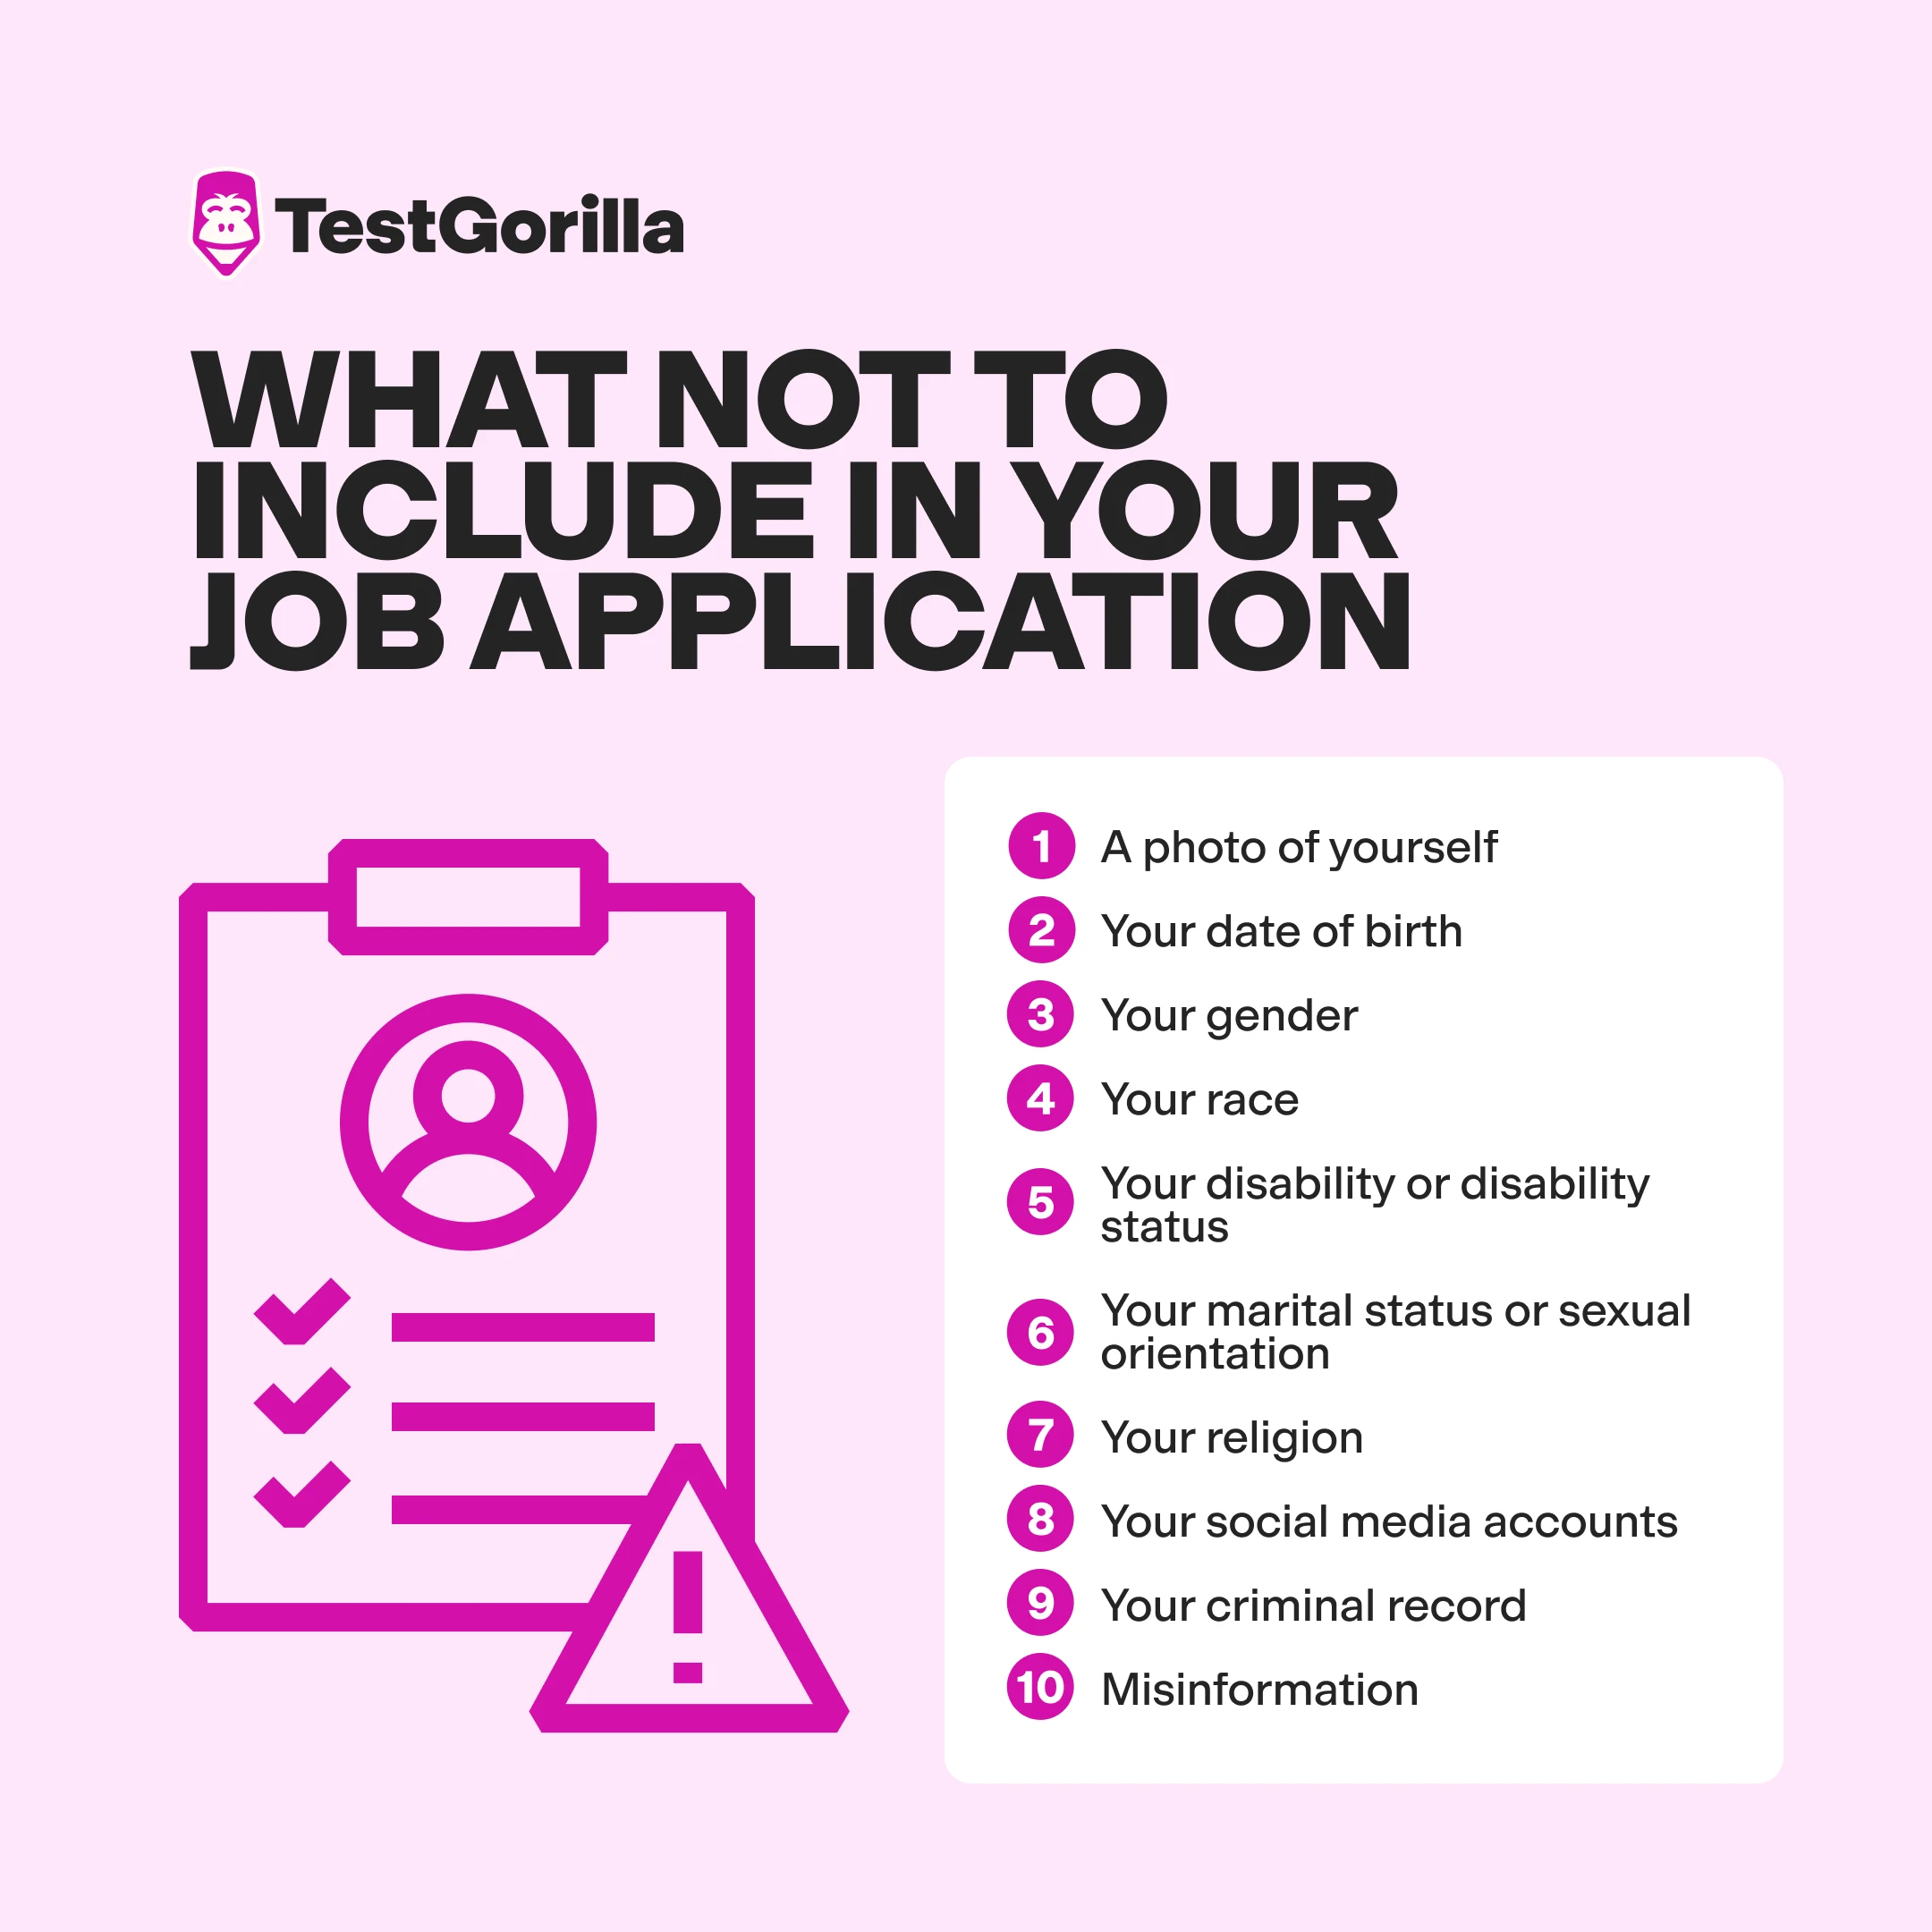 What not to include in your job application